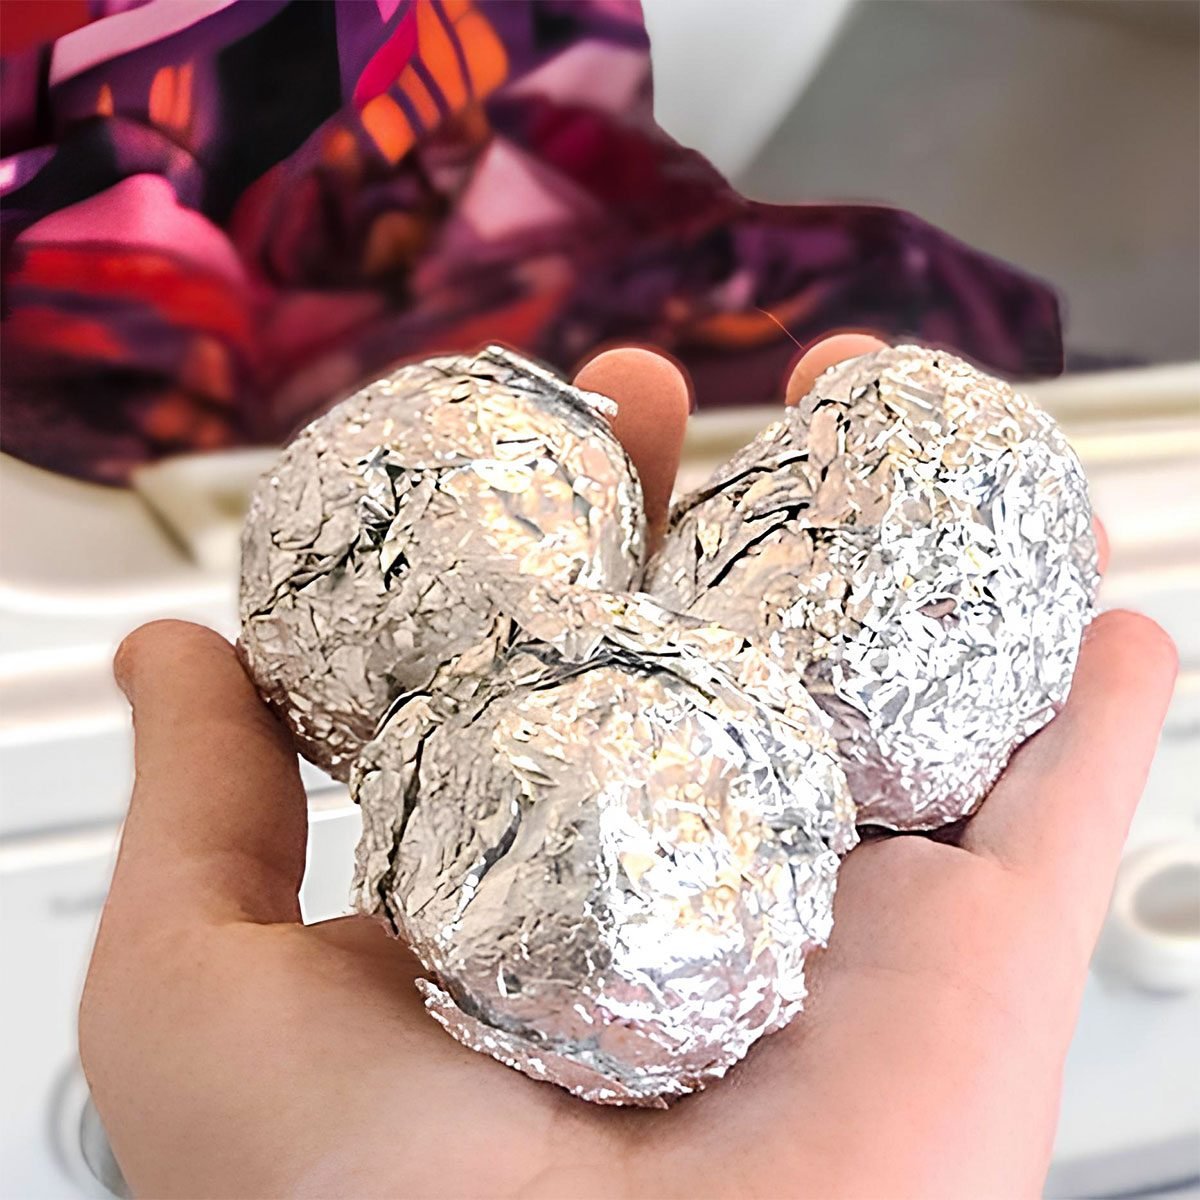 Is Aluminum Foil Bad For You?